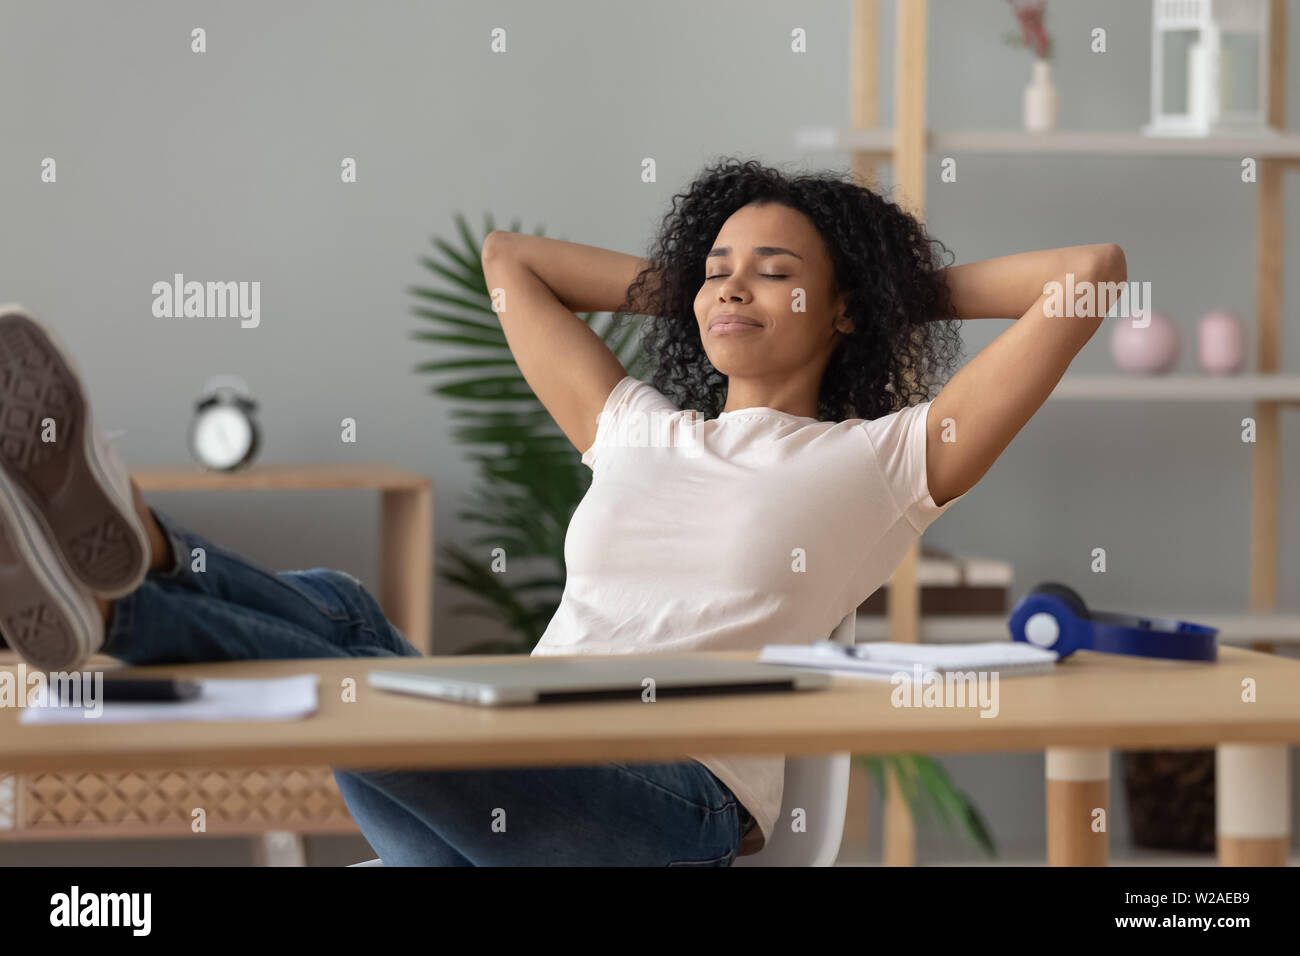 Happy african girl student relaxing finished study sit at desk Stock Photo